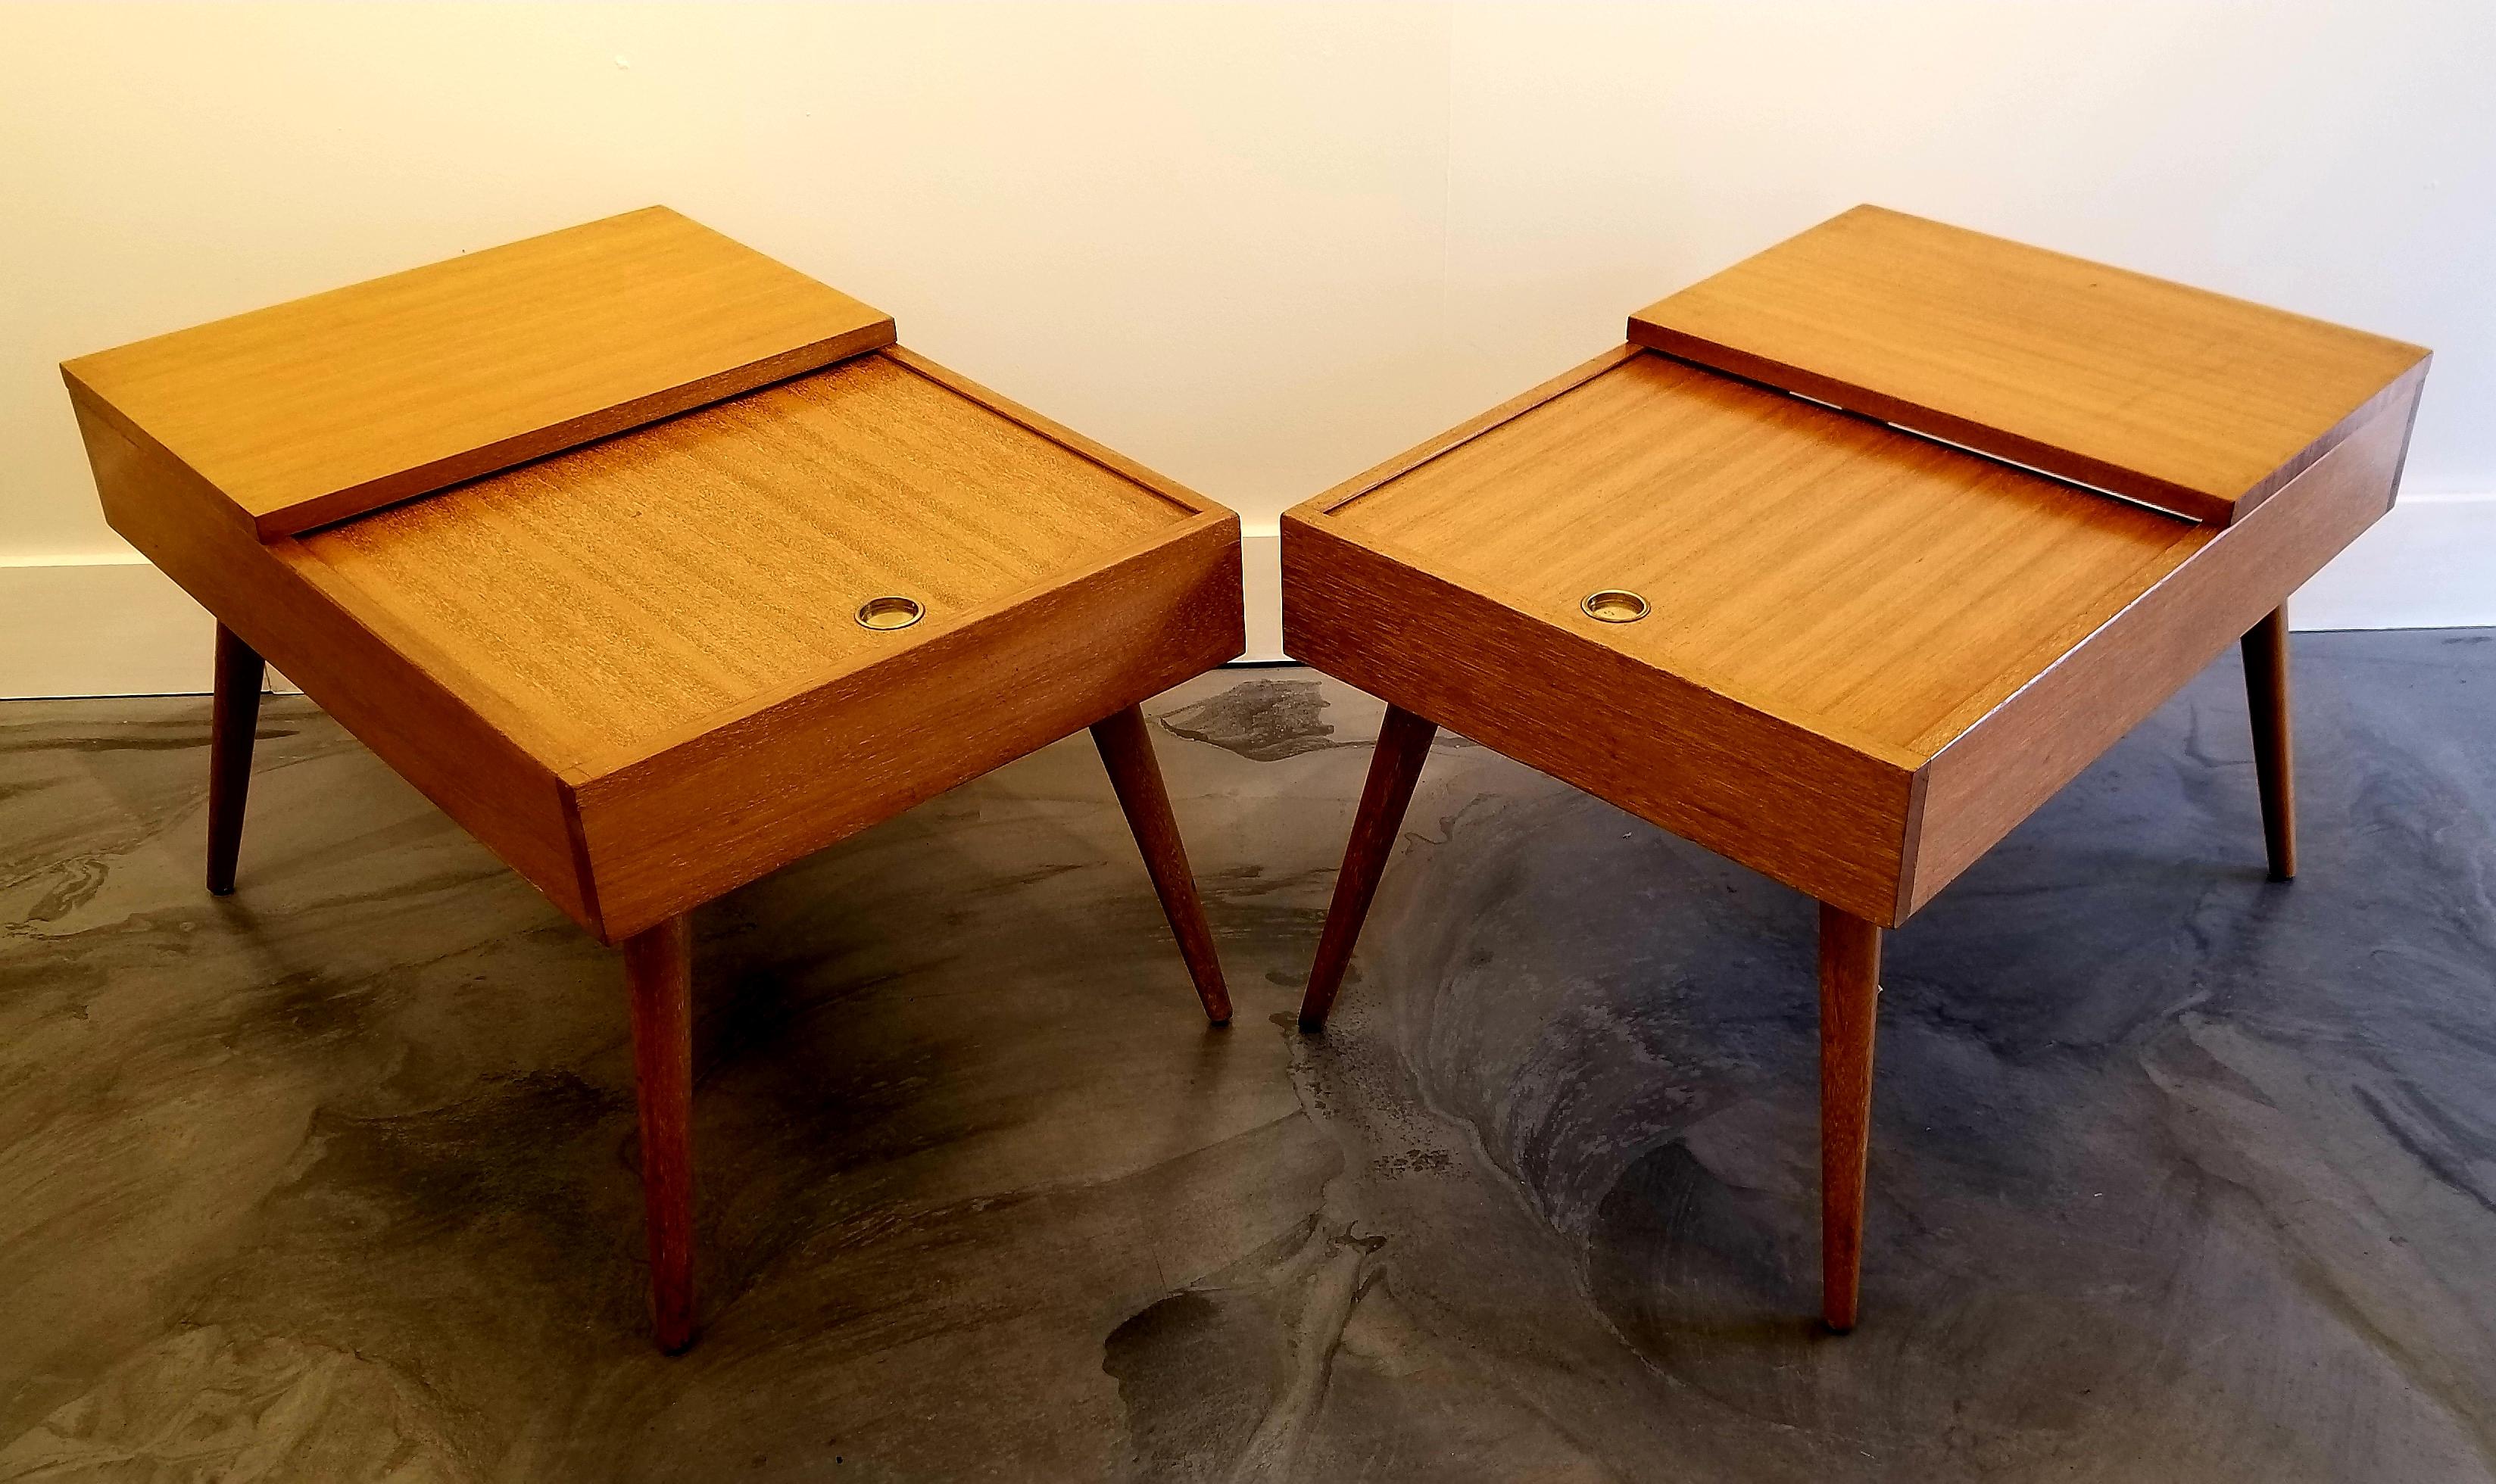 A pair of Mid-Century Modern golden mahogany end tables designed by John Keal for Brown Saltman of California, circa 1950s. Classic conical or peg leg construction with sliding door for hidden storage. Beautiful detail of wood grain with original